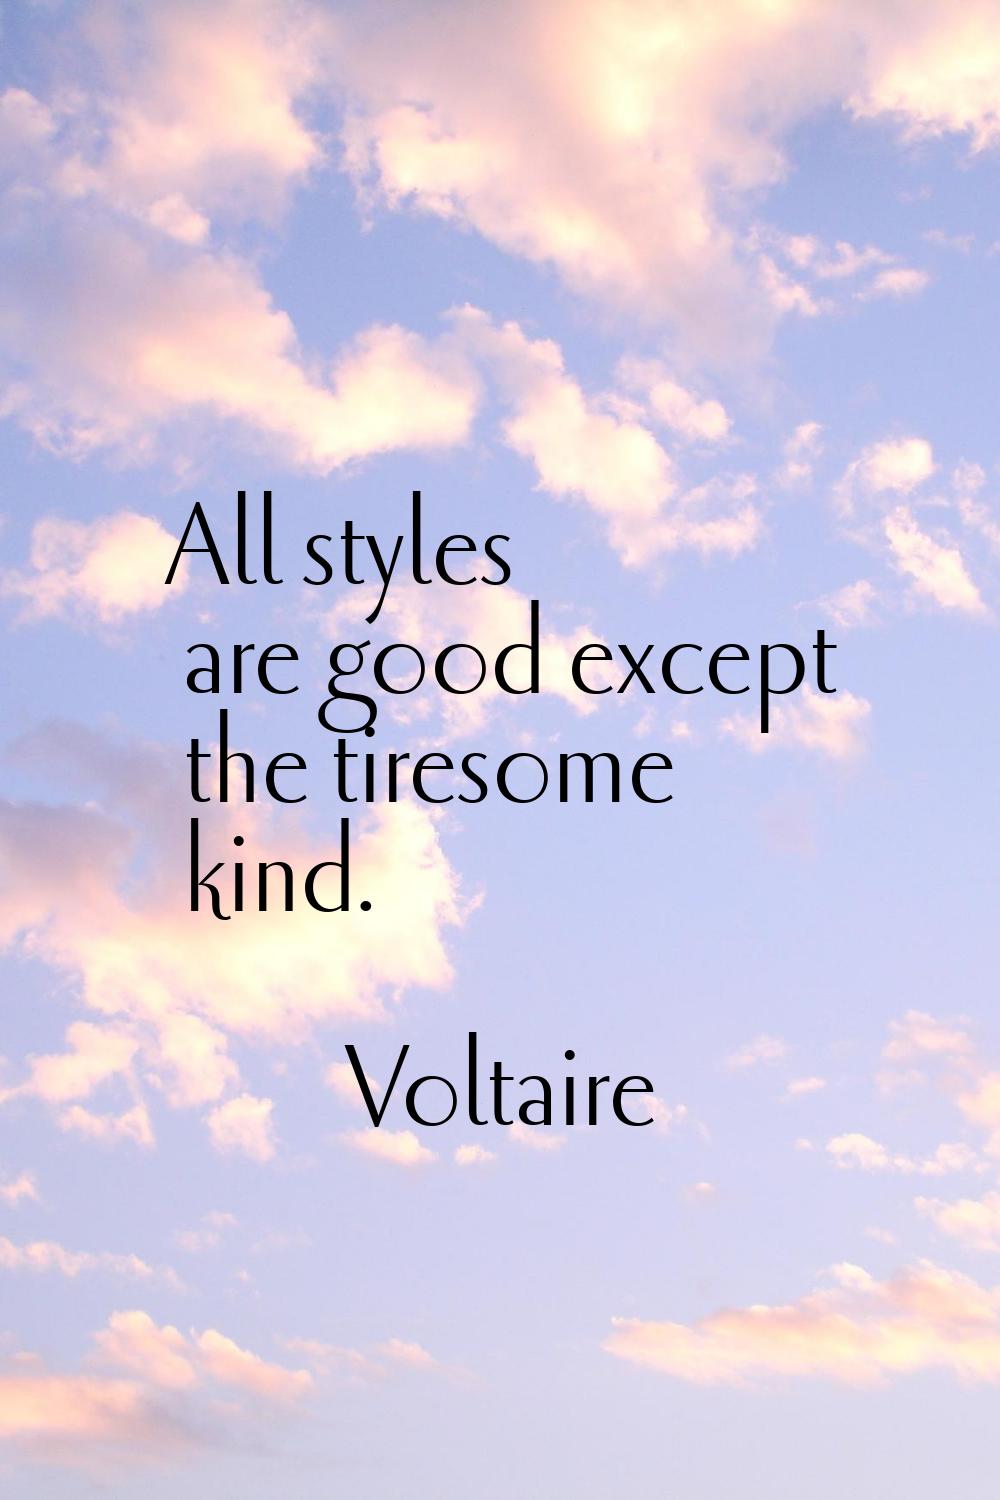 All styles are good except the tiresome kind.